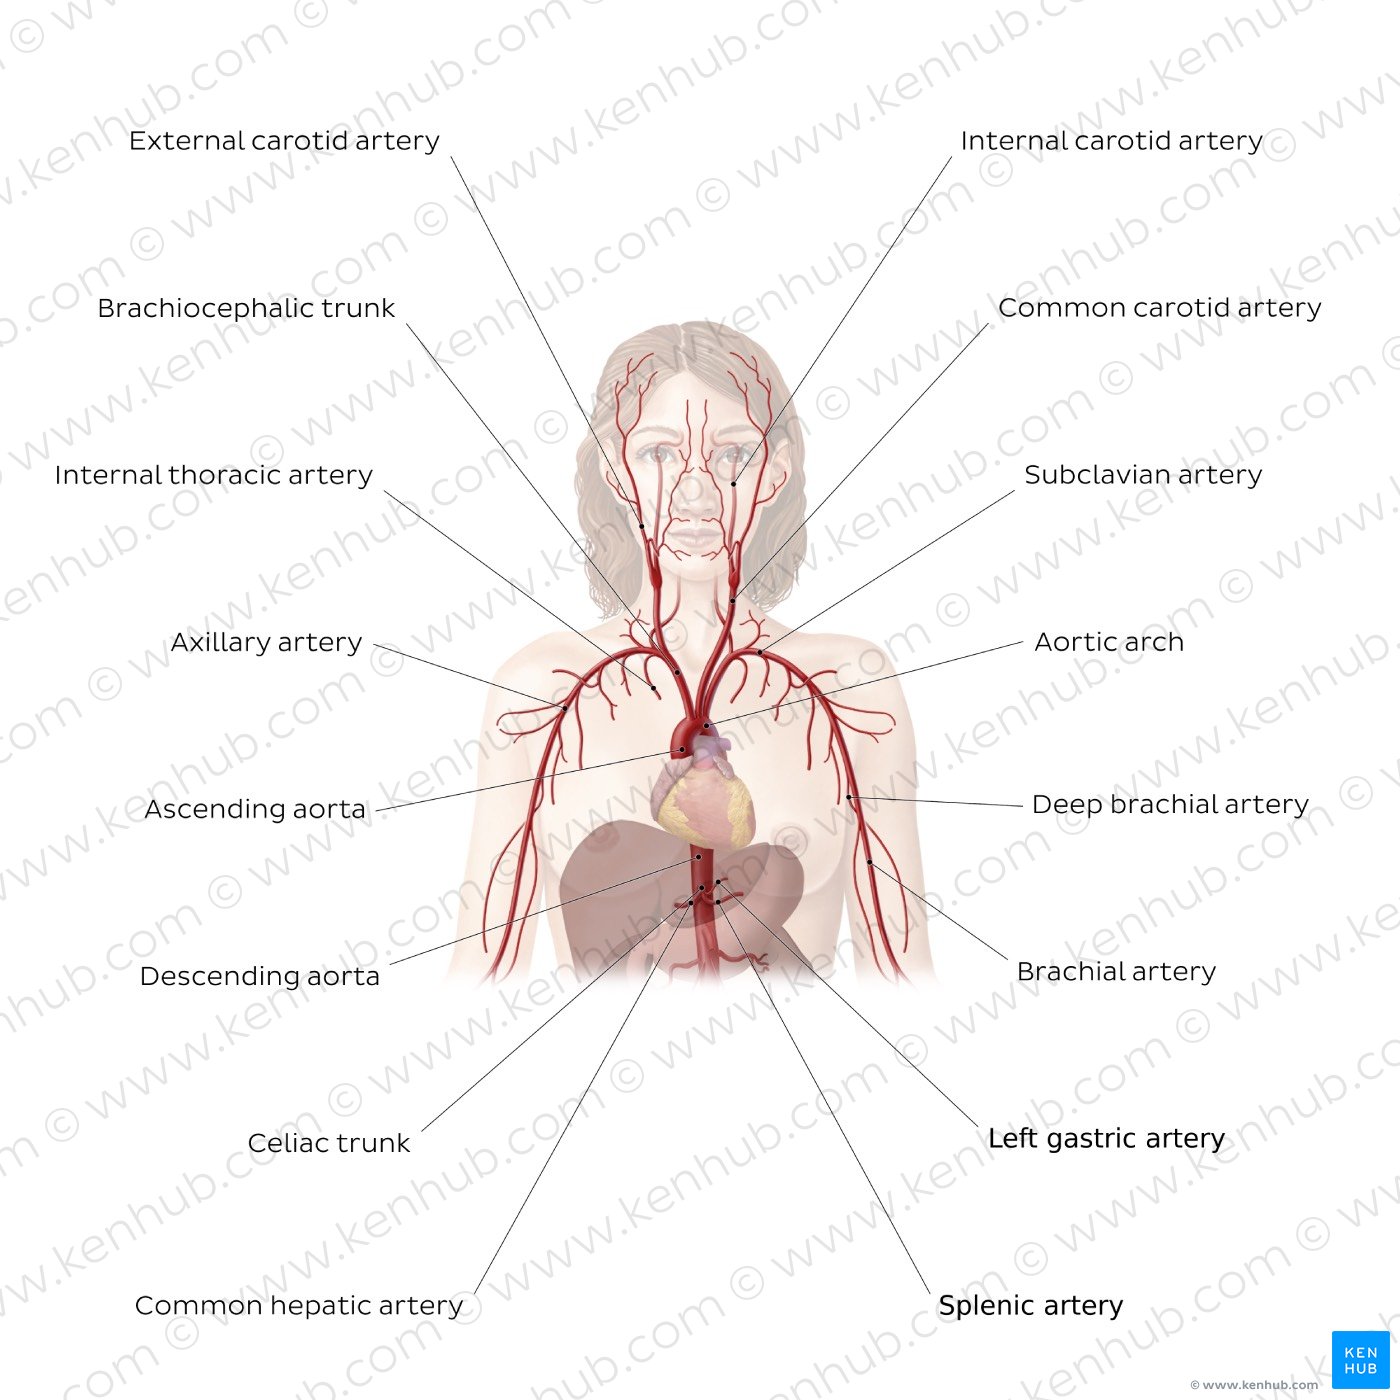 Cardiovascular system: Arteries of the upper part of the body